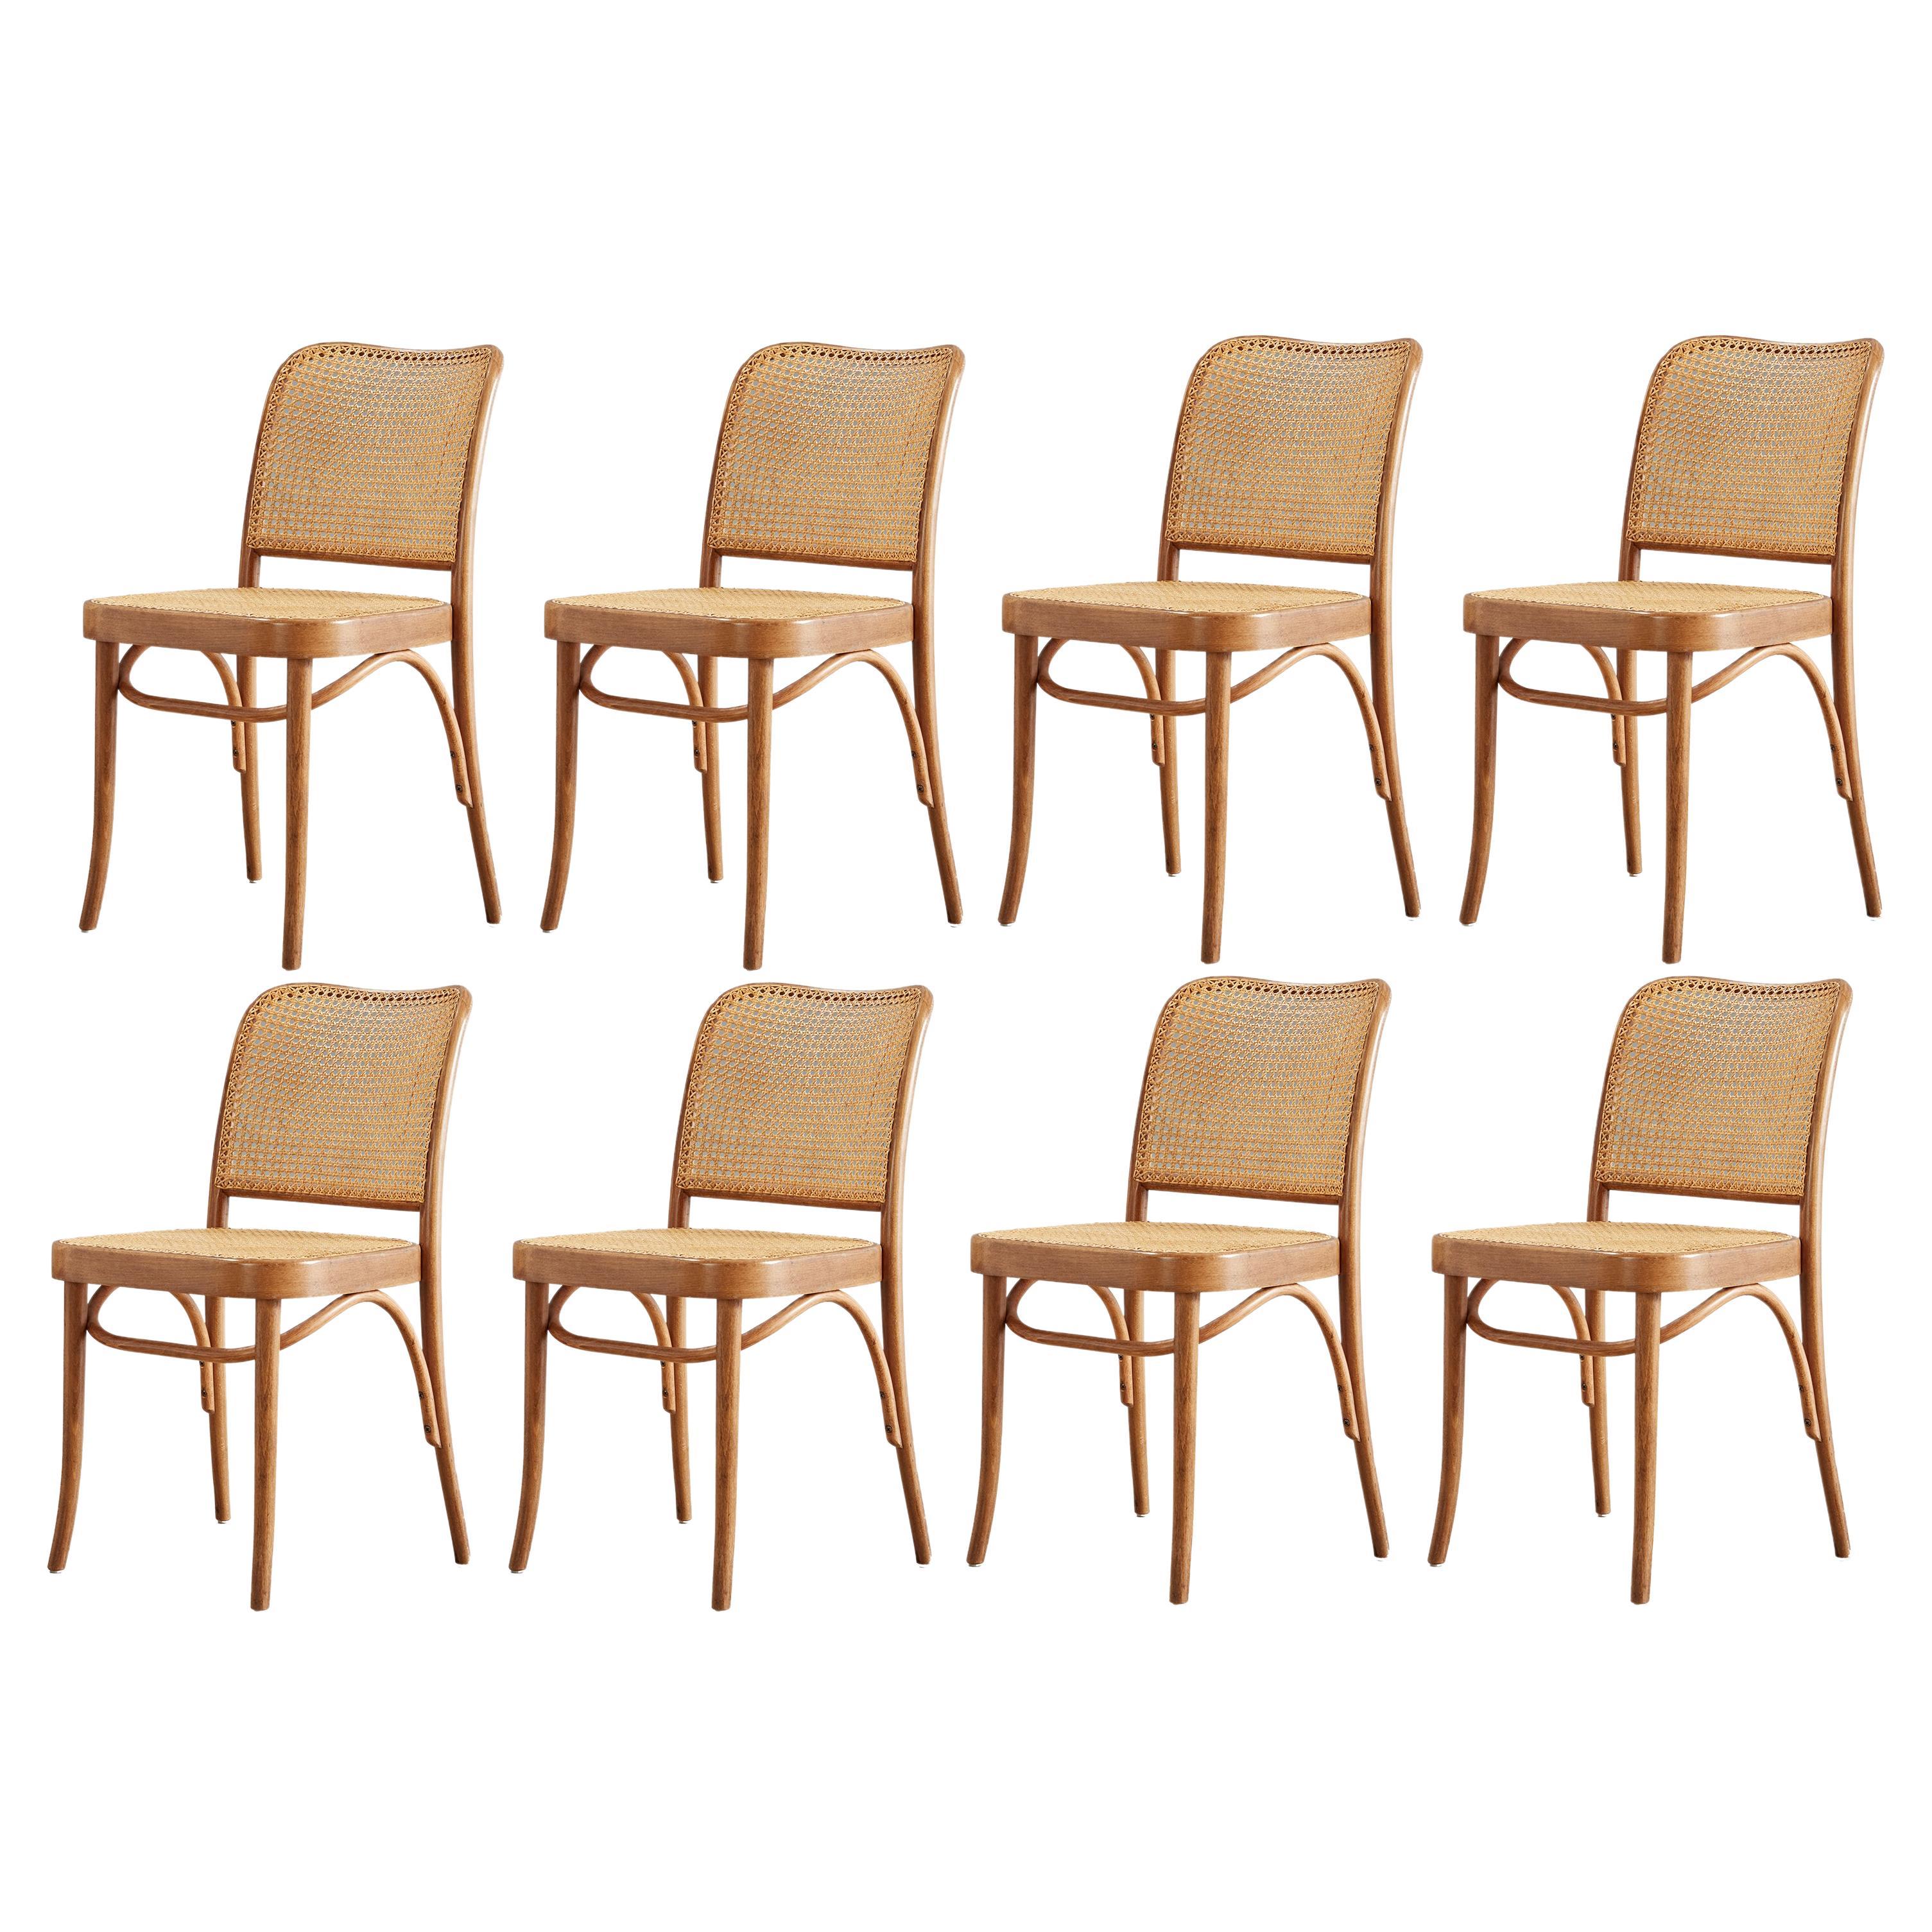 Josef Hoffman Bentwood and Cane Prague Chair for Thonet, 8 available  For Sale